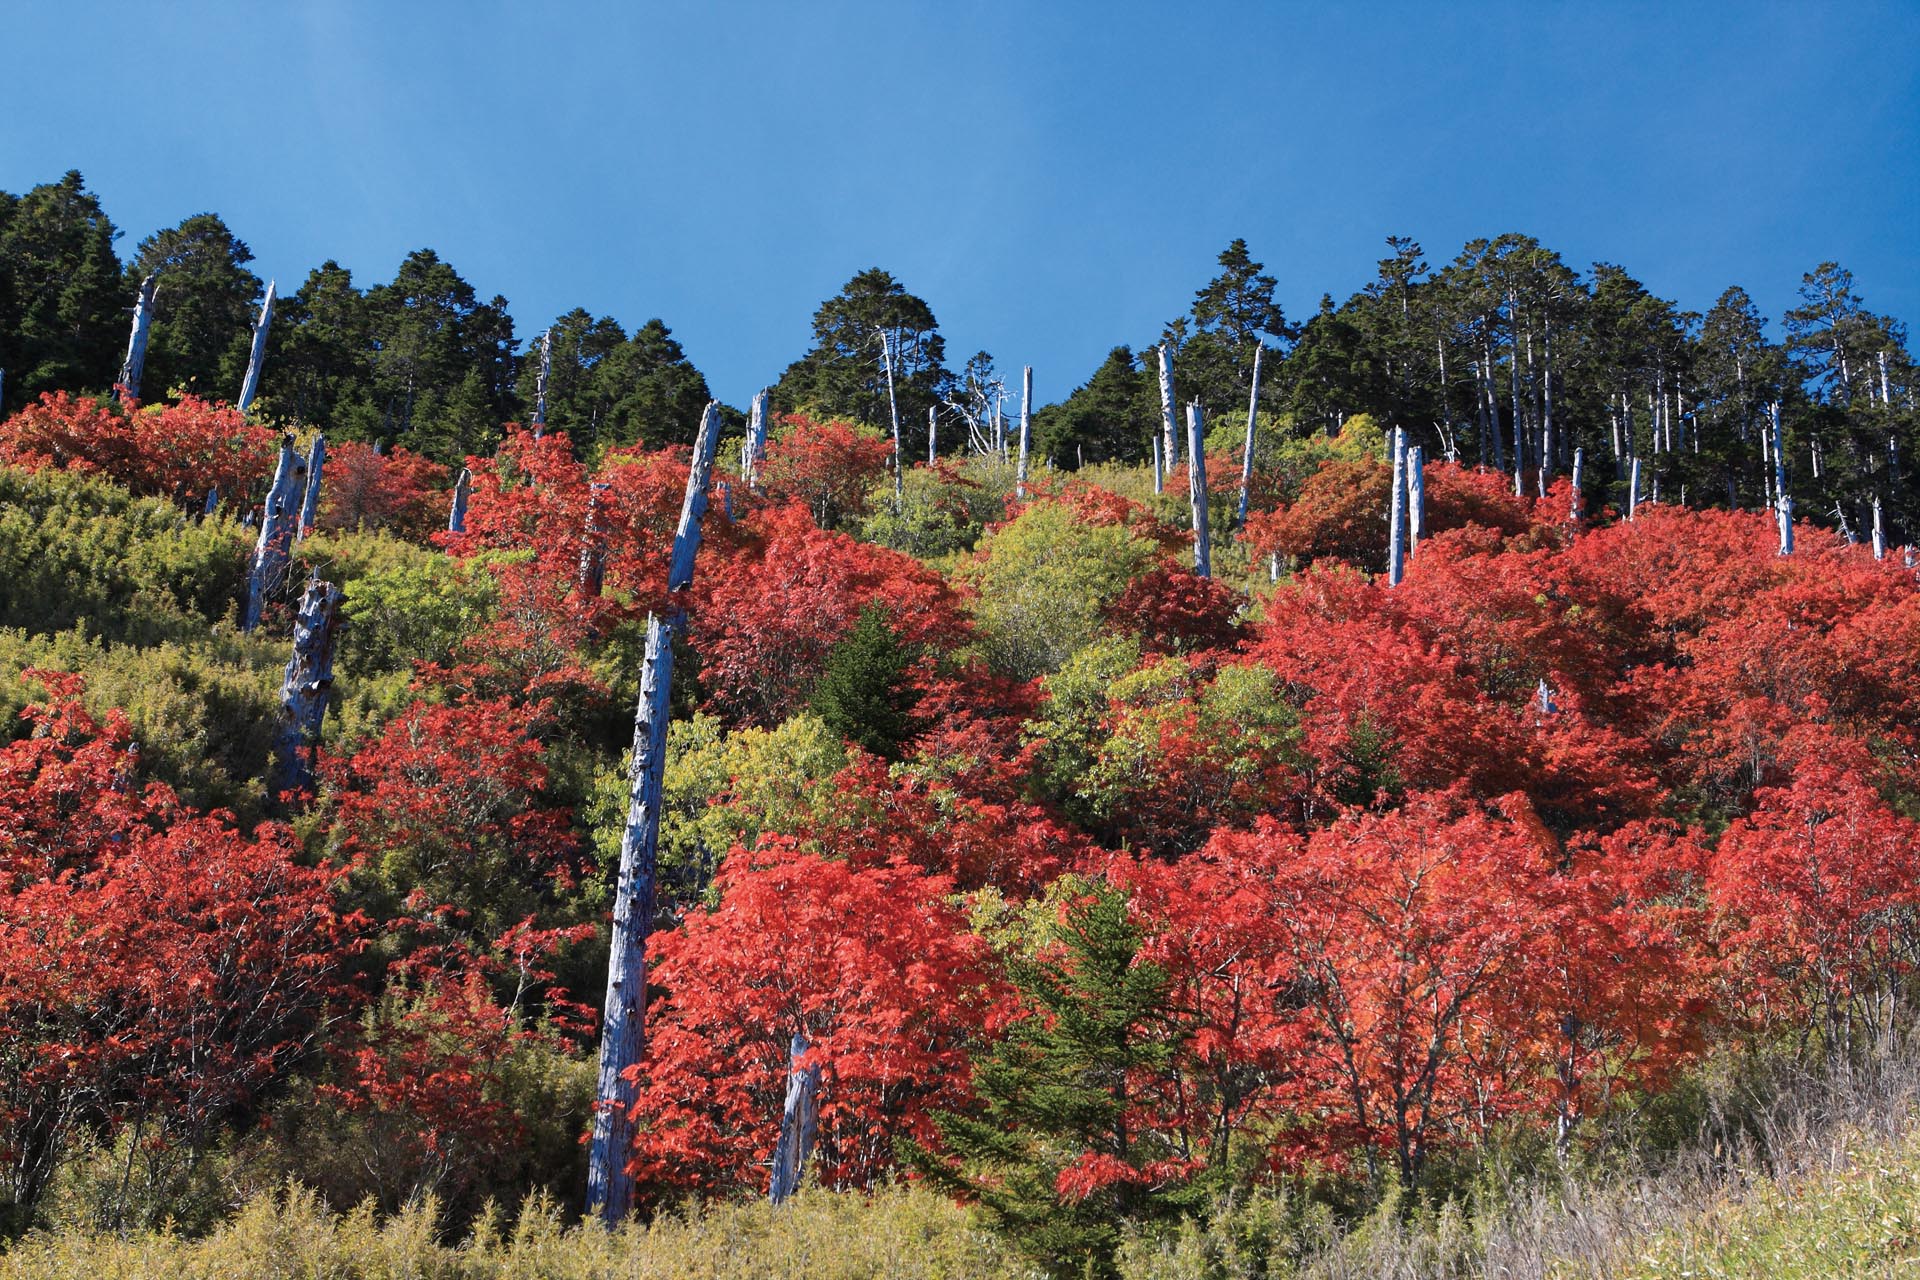 In autumn, the leaves of Taiwan Mountain Ash turning from green to red attract people to the high mountains.